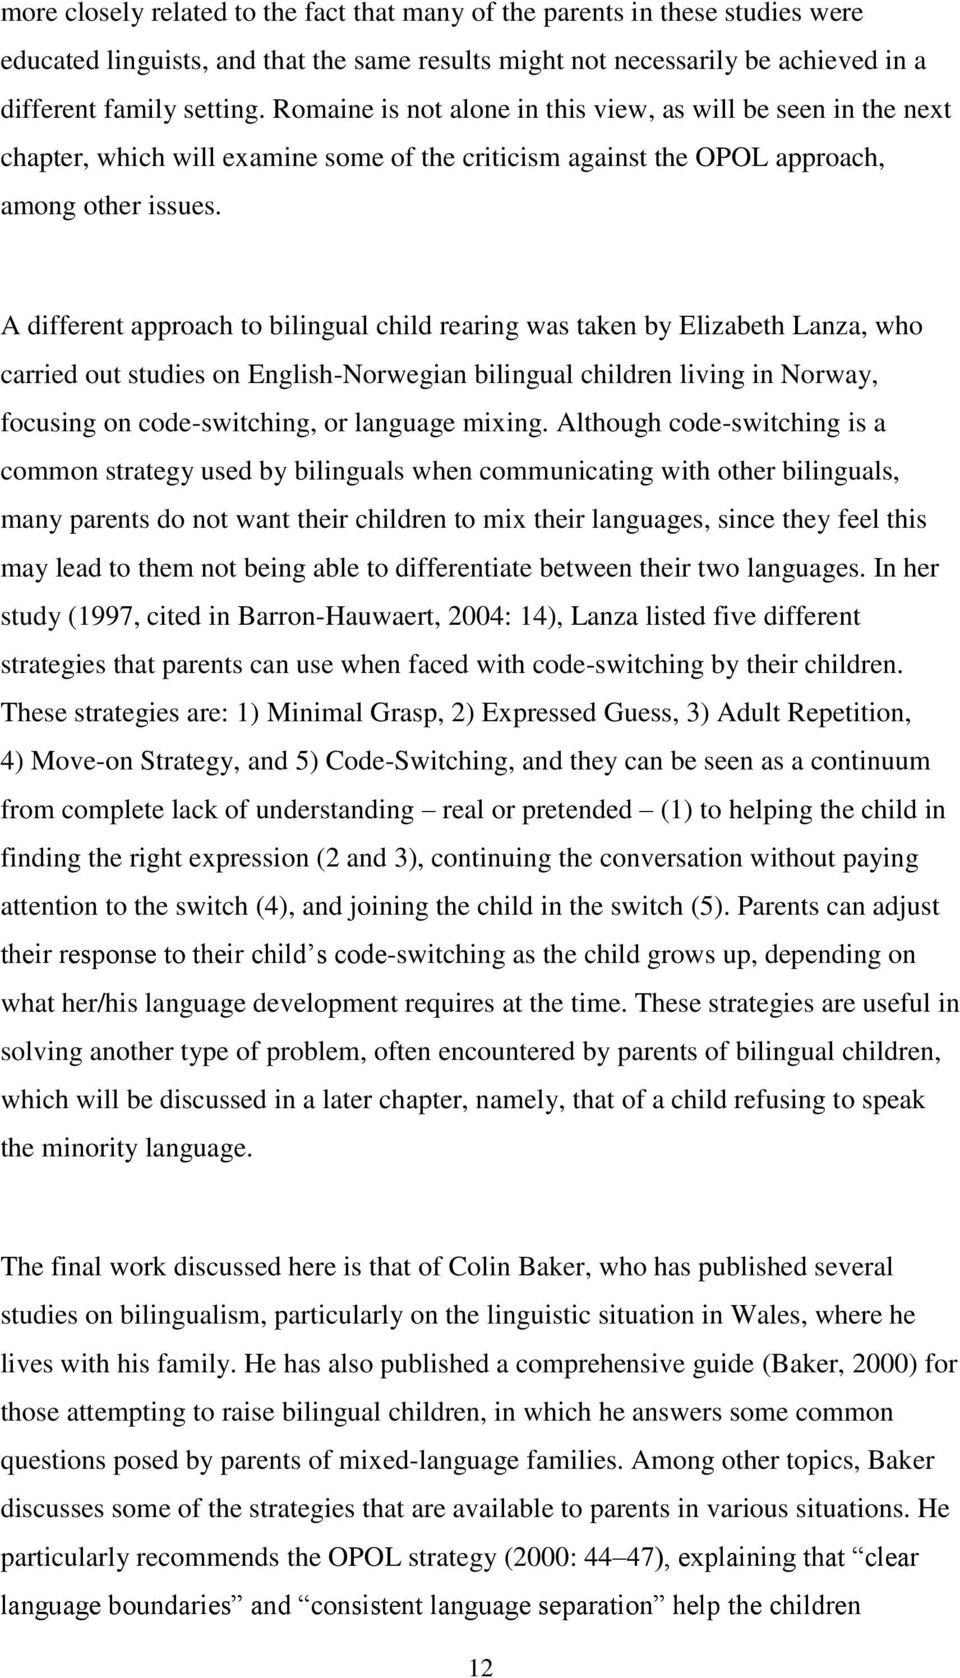 A different approach to bilingual child rearing was taken by Elizabeth Lanza, who carried out studies on English-Norwegian bilingual children living in Norway, focusing on code-switching, or language